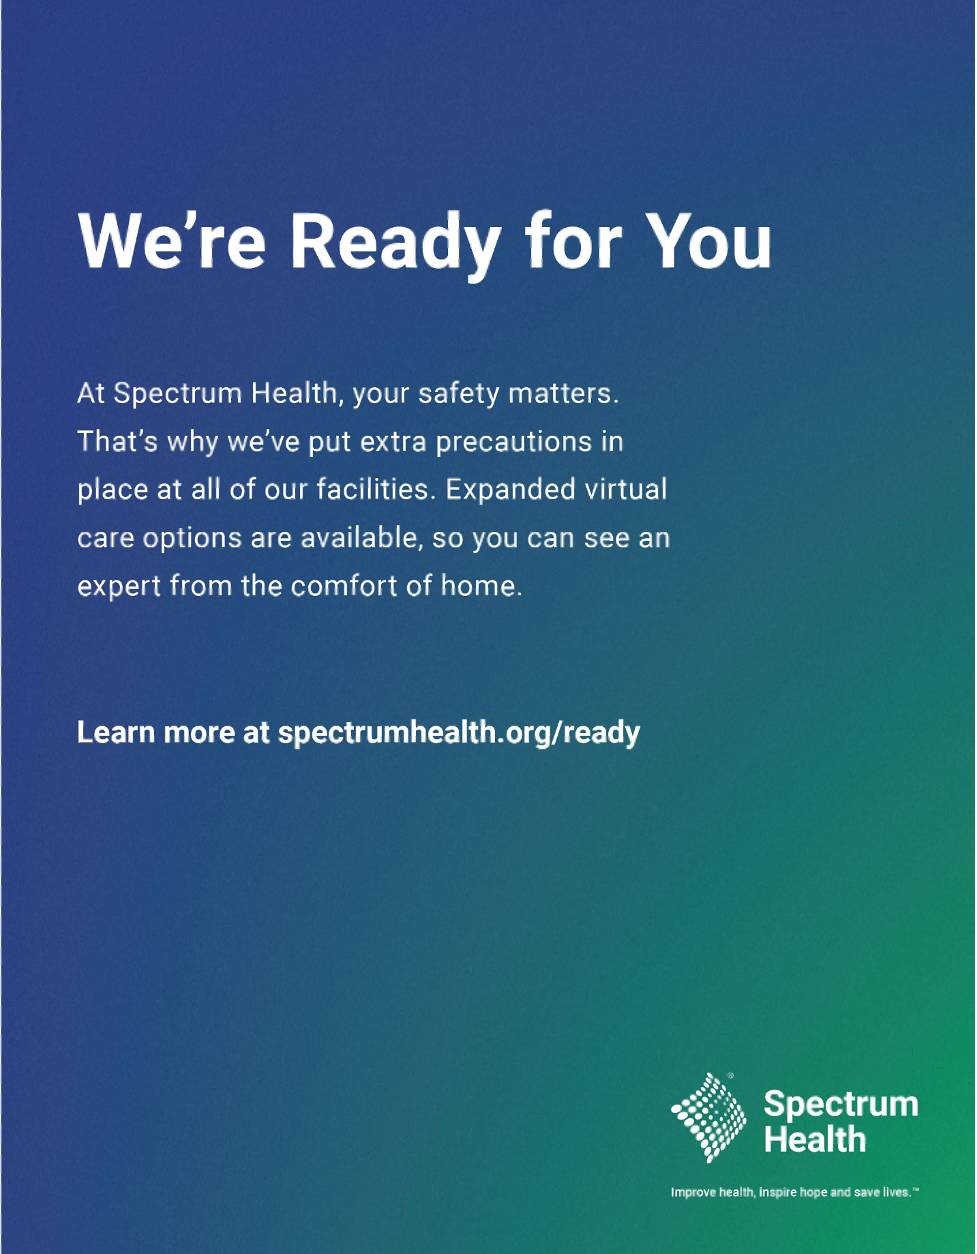 Link to Spectrum Health Were Ready for You website